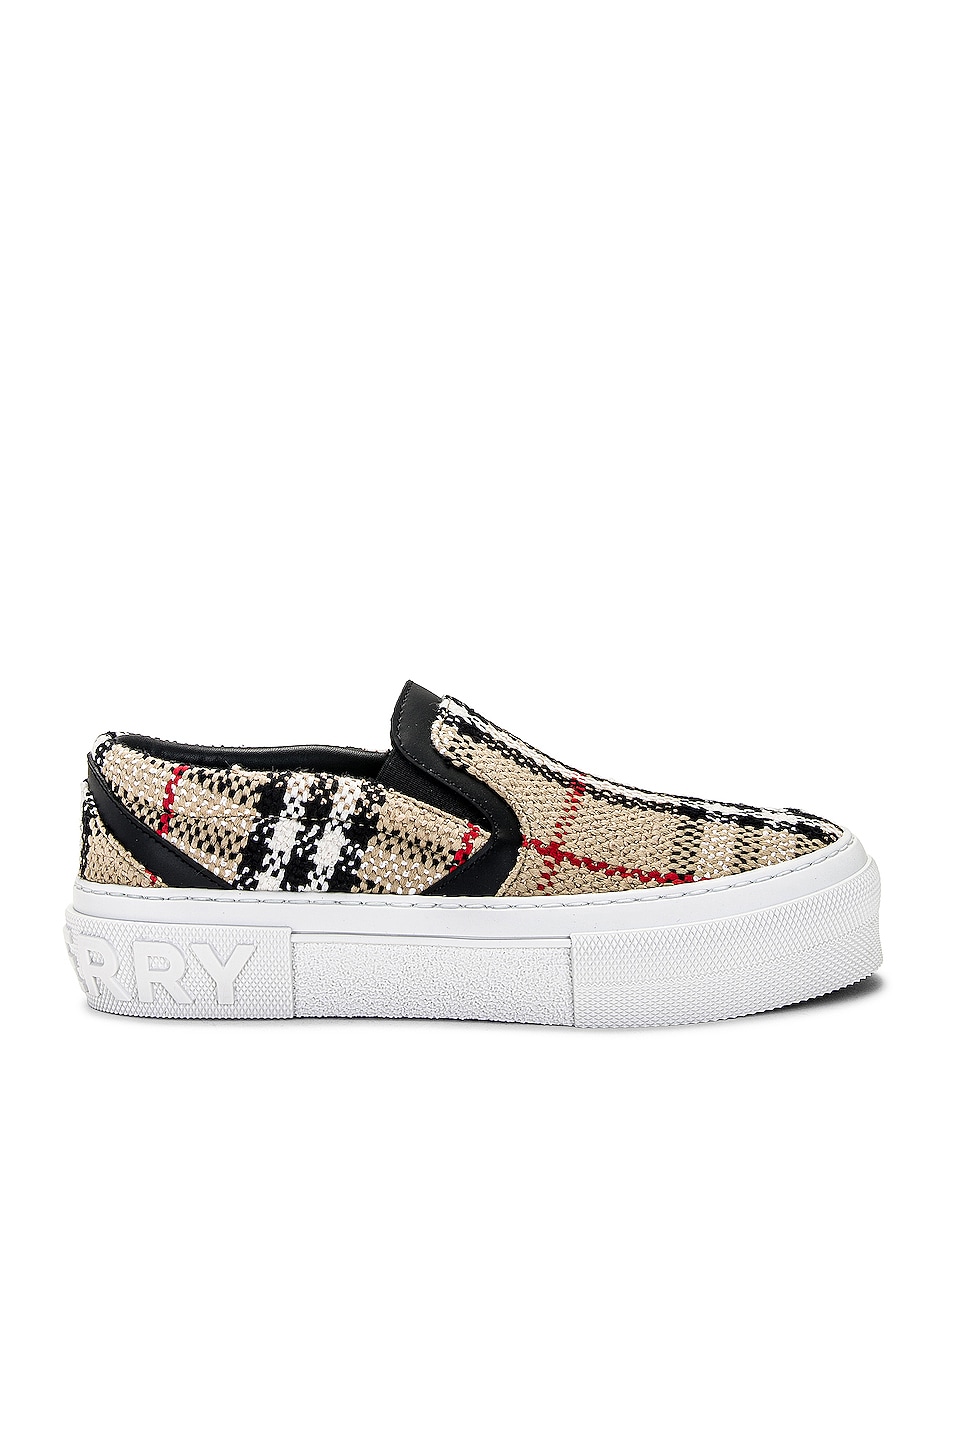 Image 1 of Burberry Curt Check Sneaker in Archive Beige Check